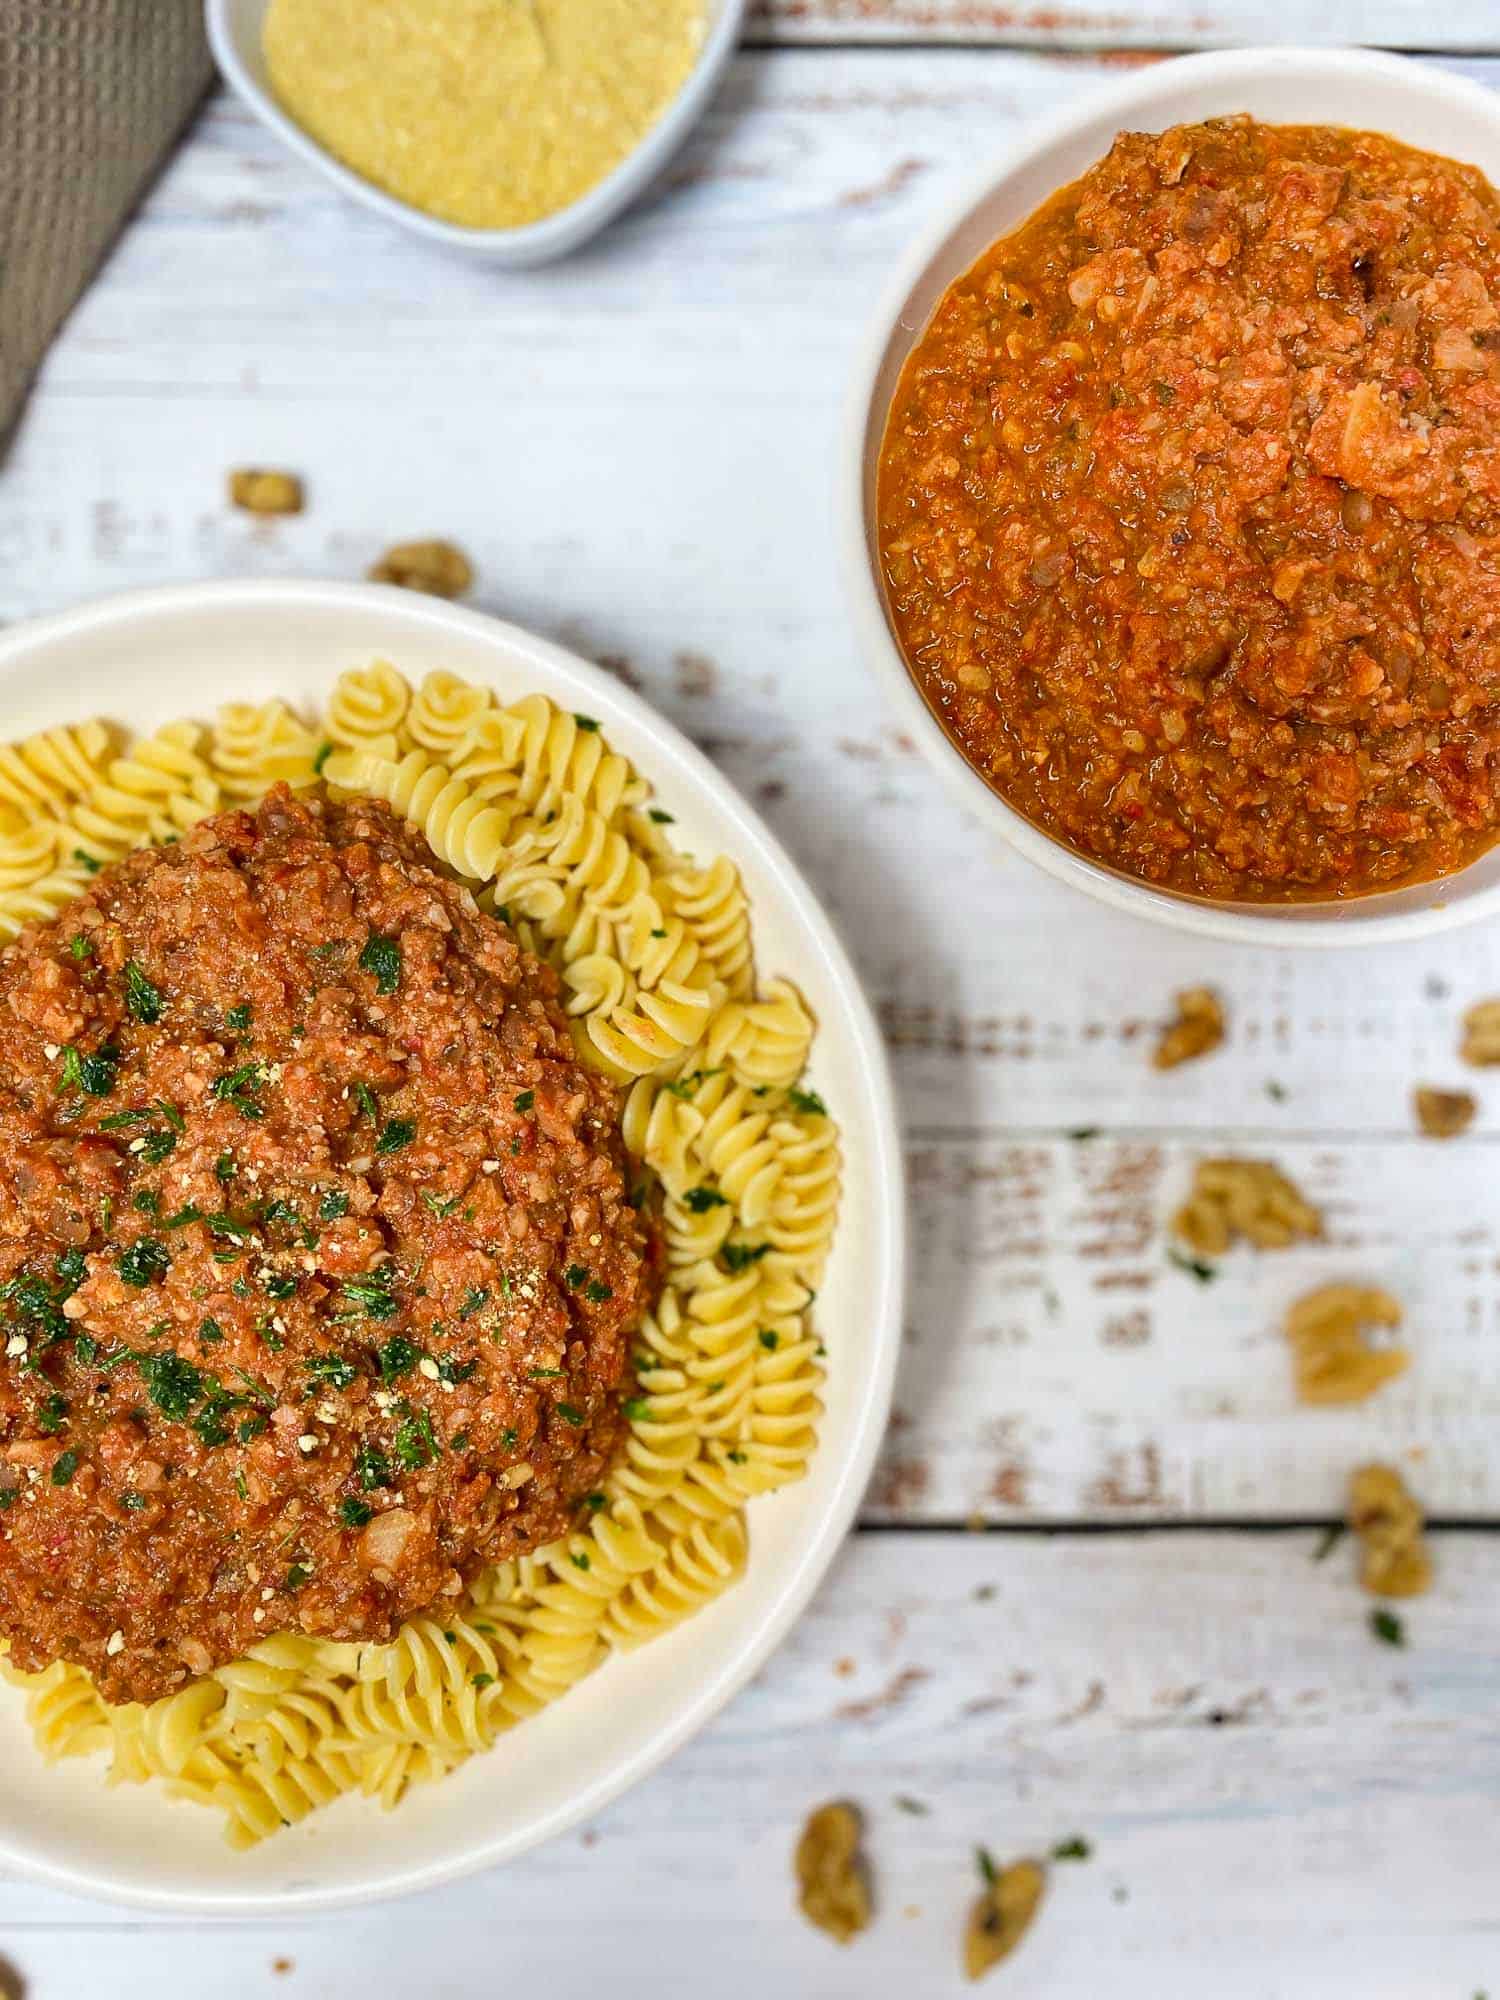 plate of pasta with sauce on top and bowl of bolognese sauce beside it